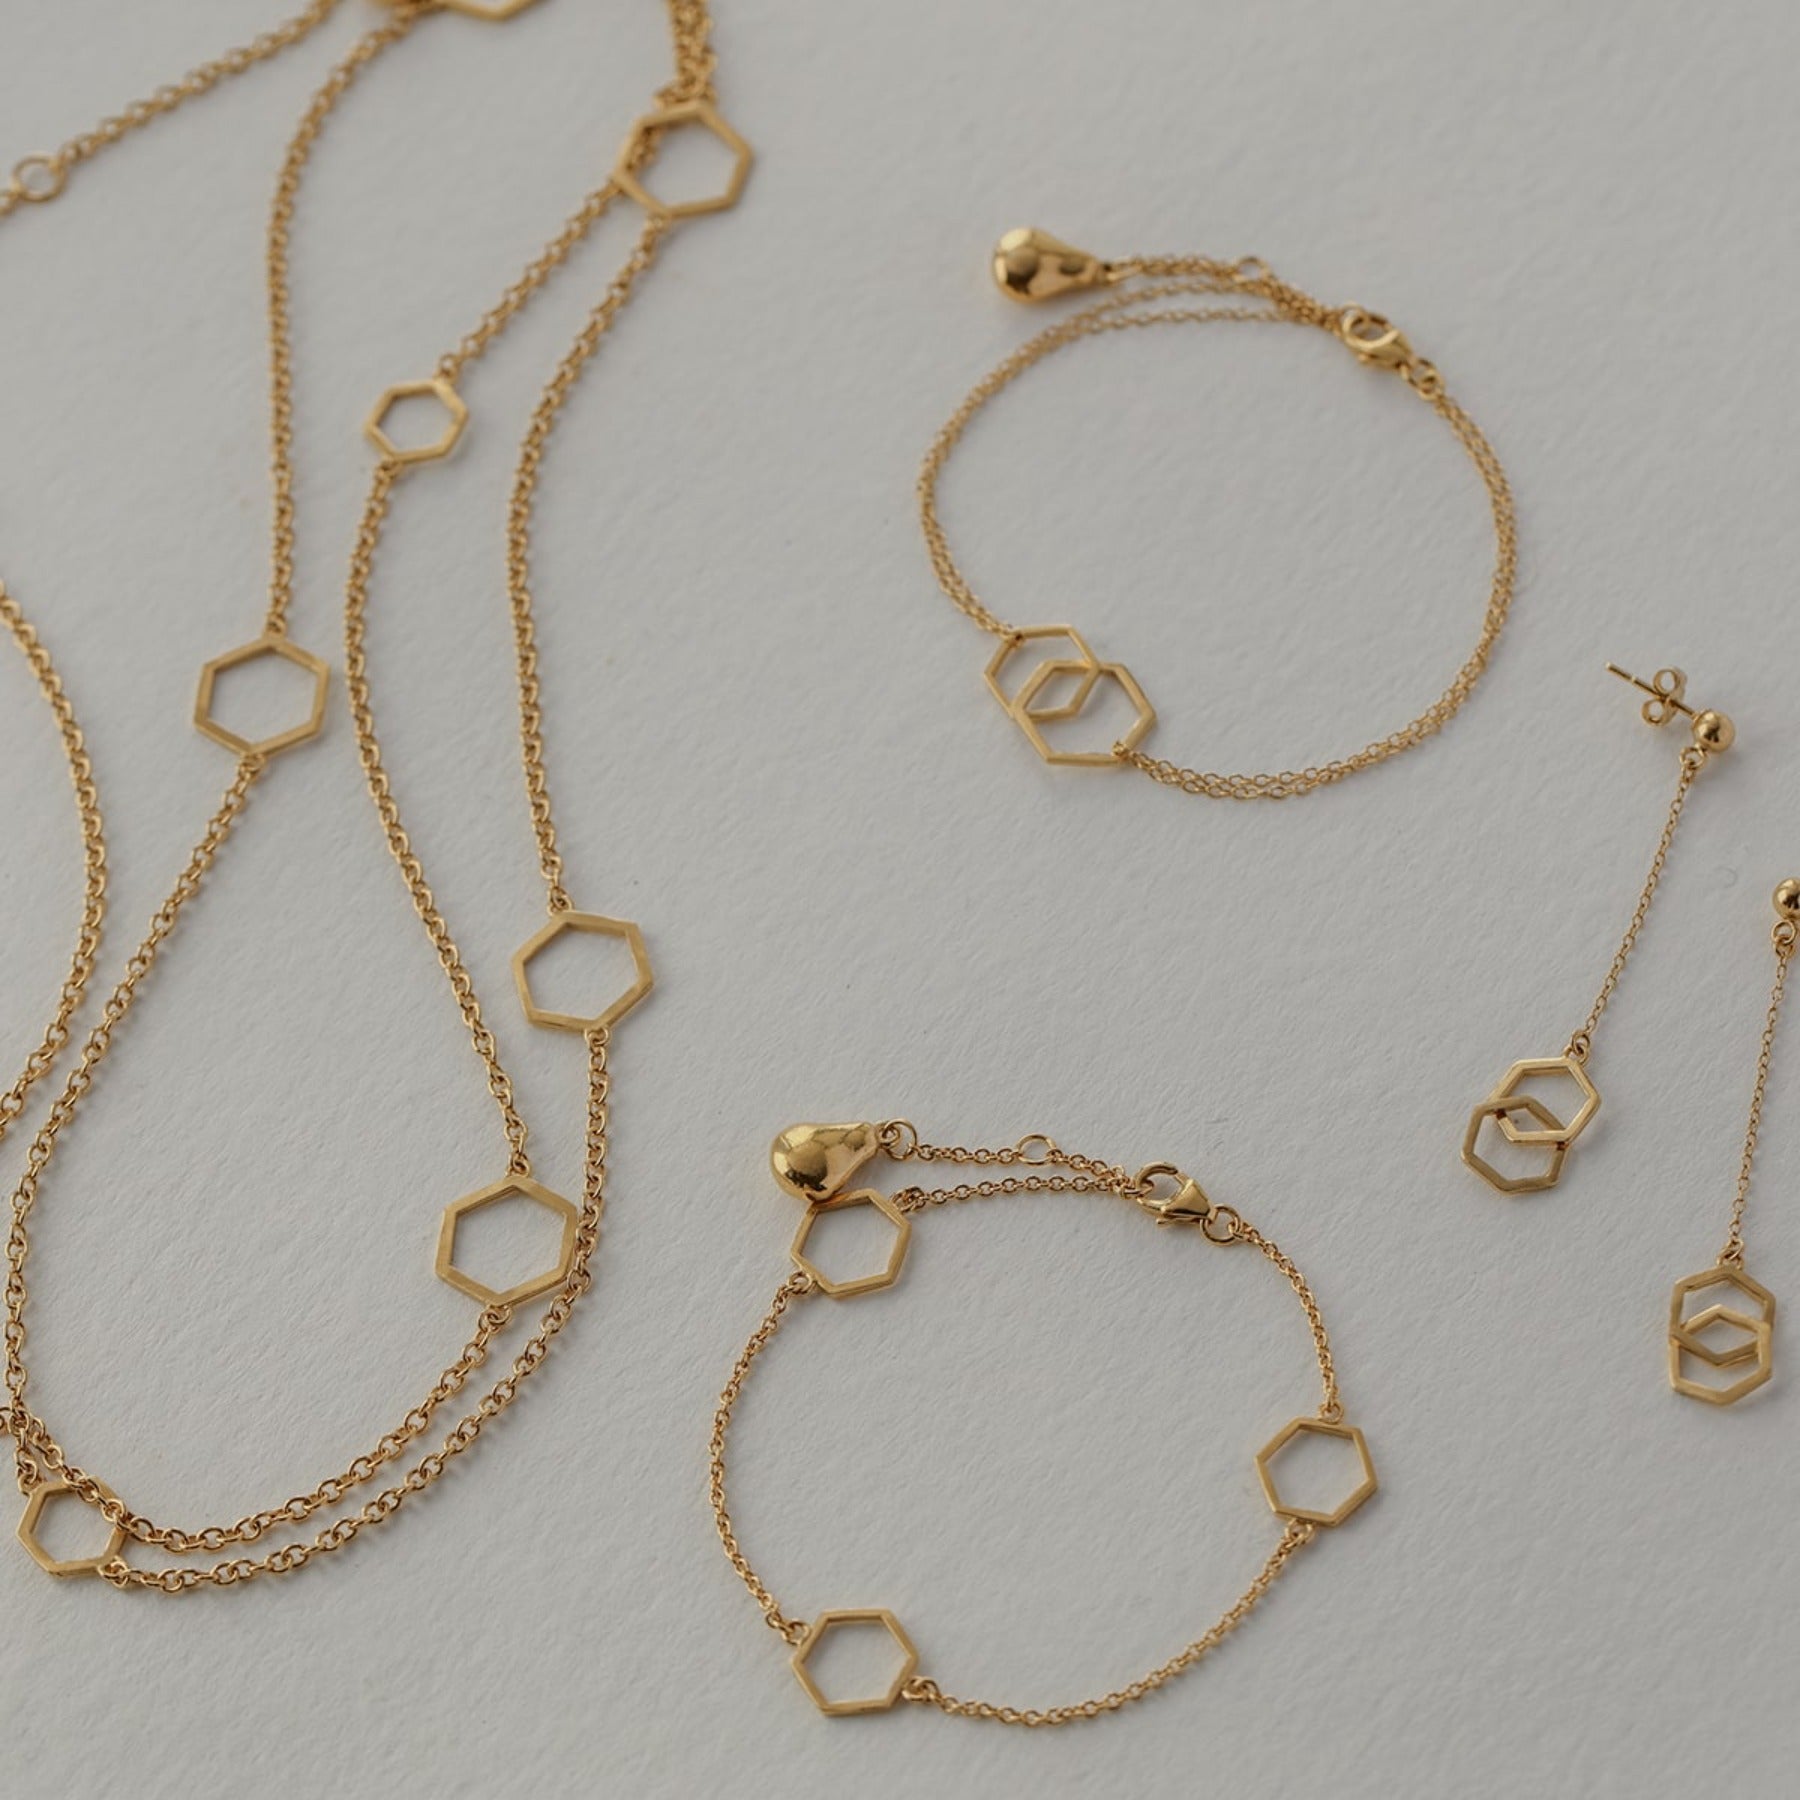 Geometric bracelet with three hexagons stationed along a delicate cable chain and finished with an Anjou pear charm in 18k gold vermeil.